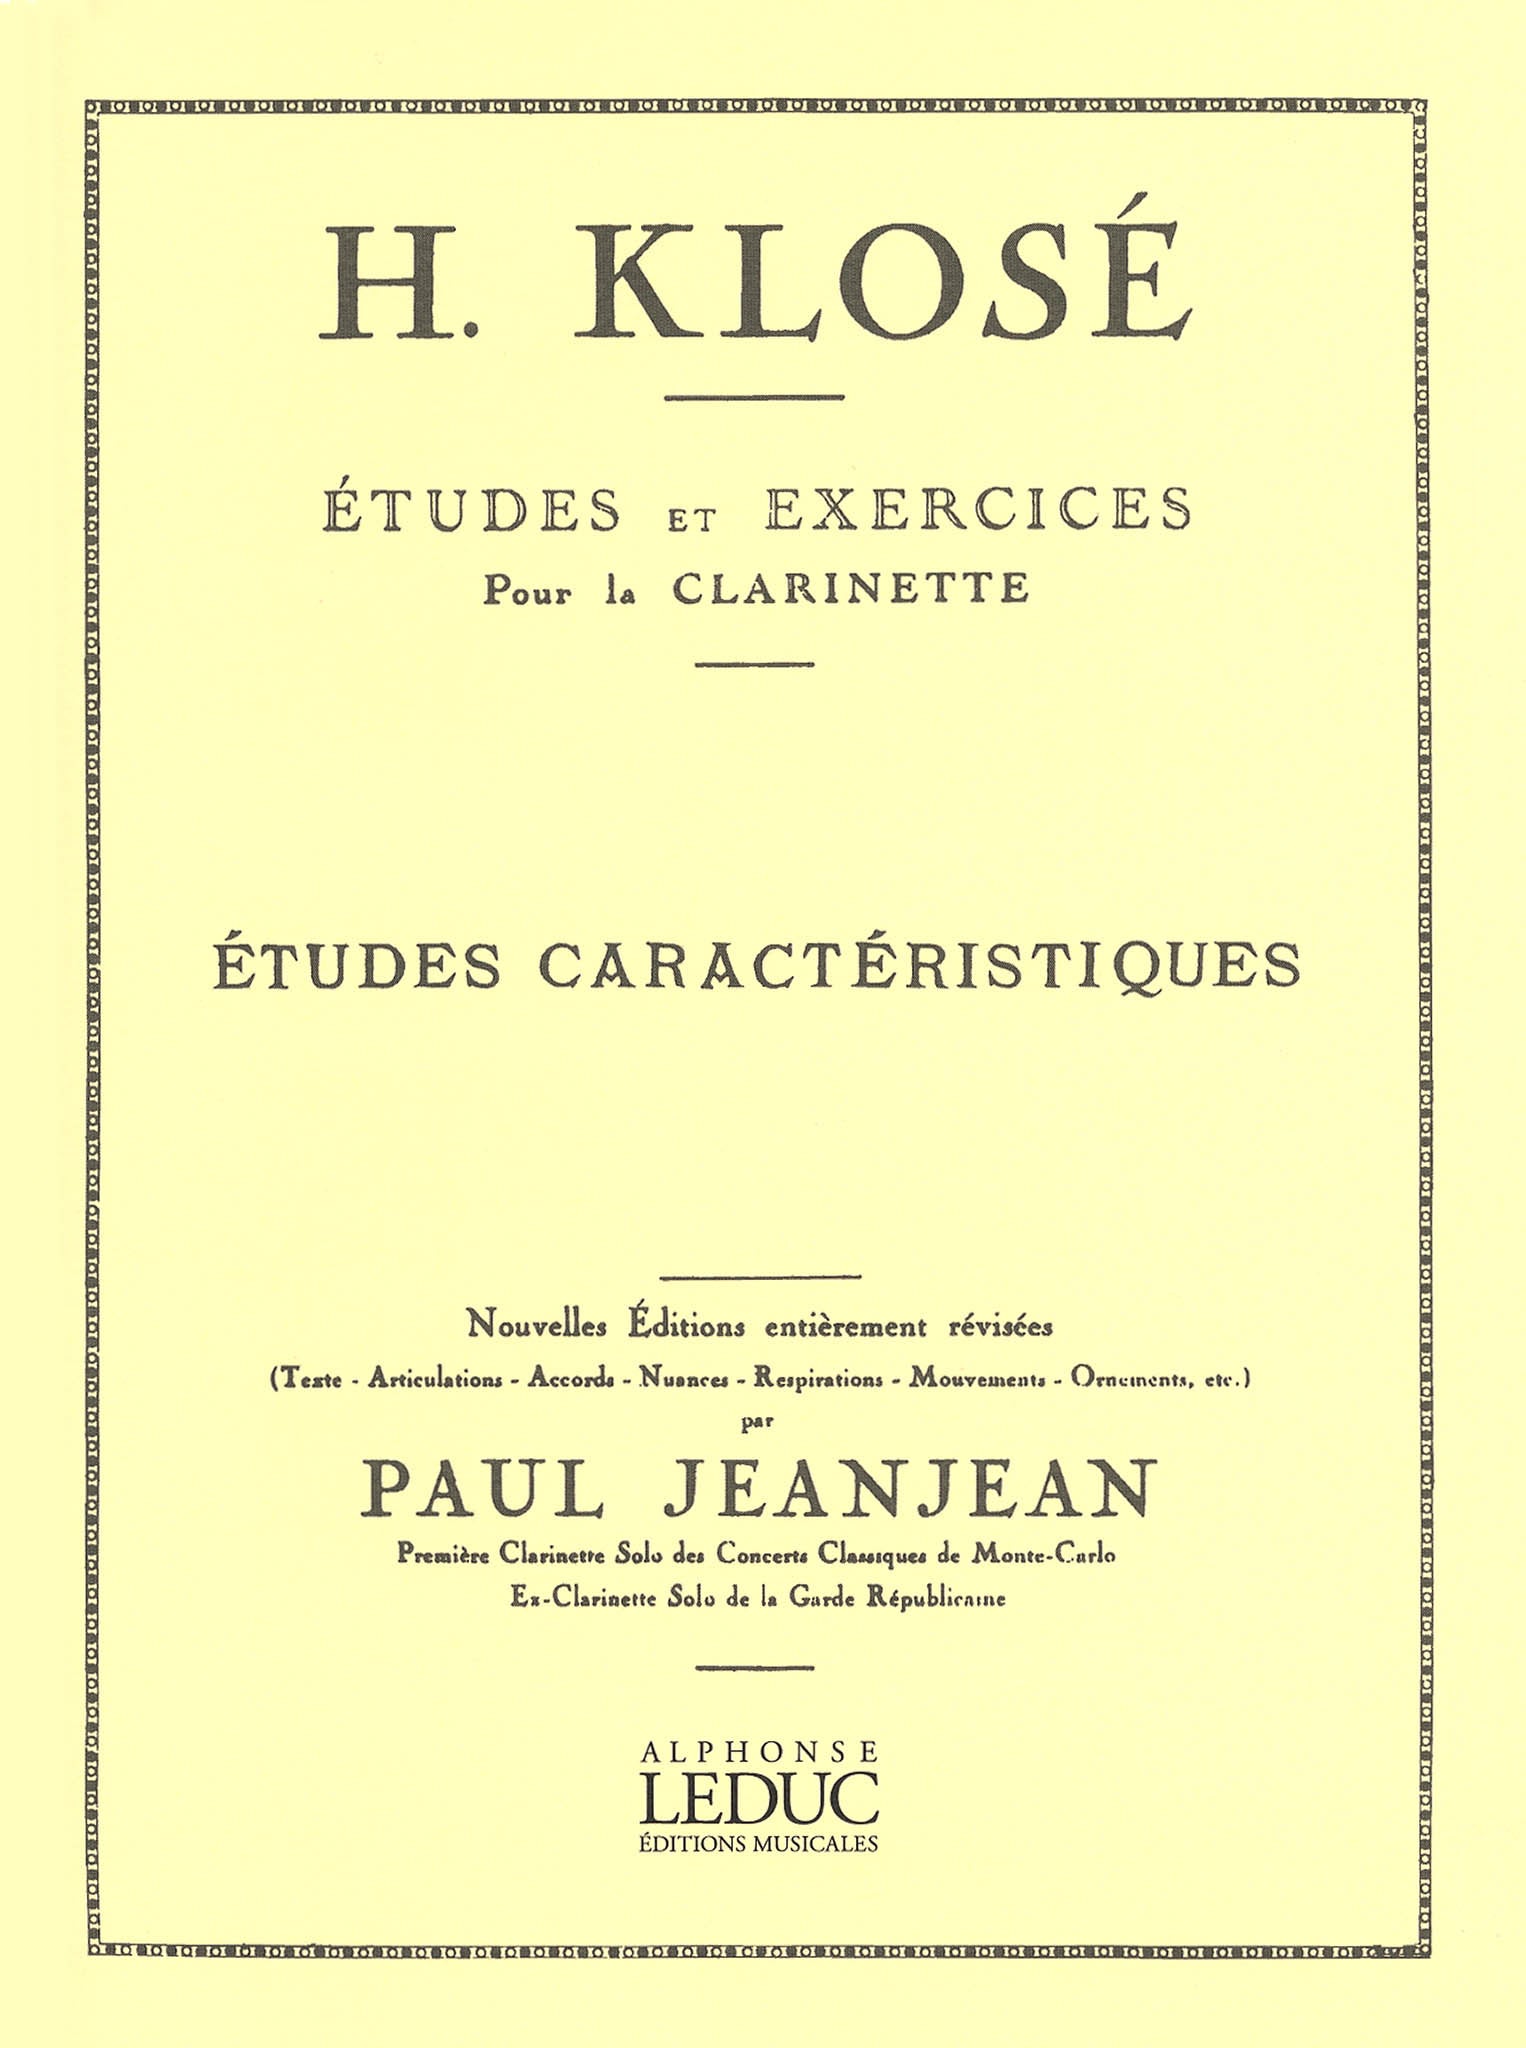 Klosé 20 Characteristic Studies for clarinet cover